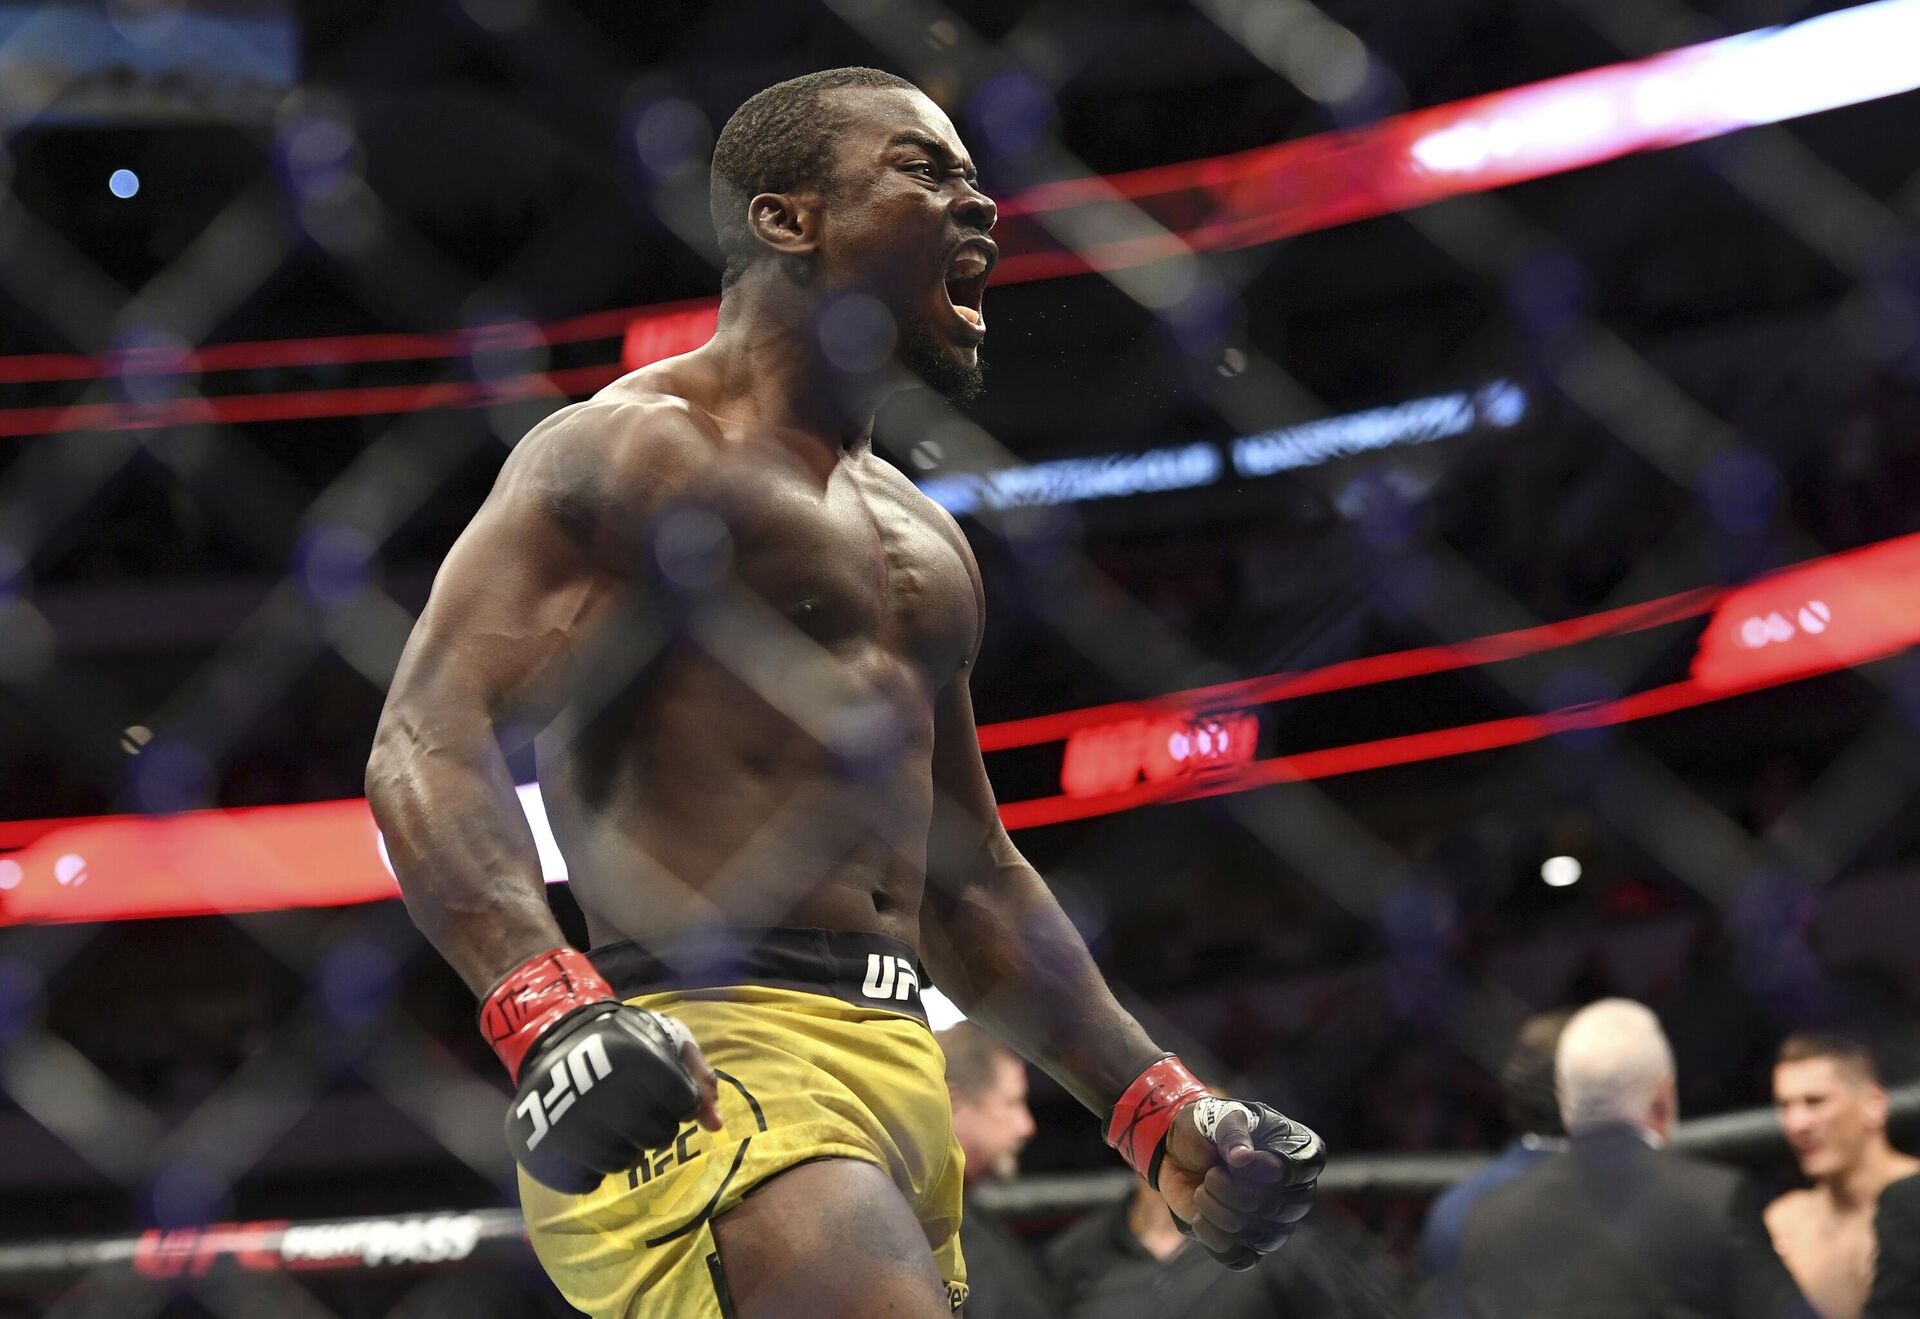 Abdul Razak Alhassan exults after knocking out Niko Price in their welterweight mixed martial arts bout at UFC 228 on Saturday, Sept. 8, 2018, in Dallas.  - Sputnik International, 1920, 18.01.2023